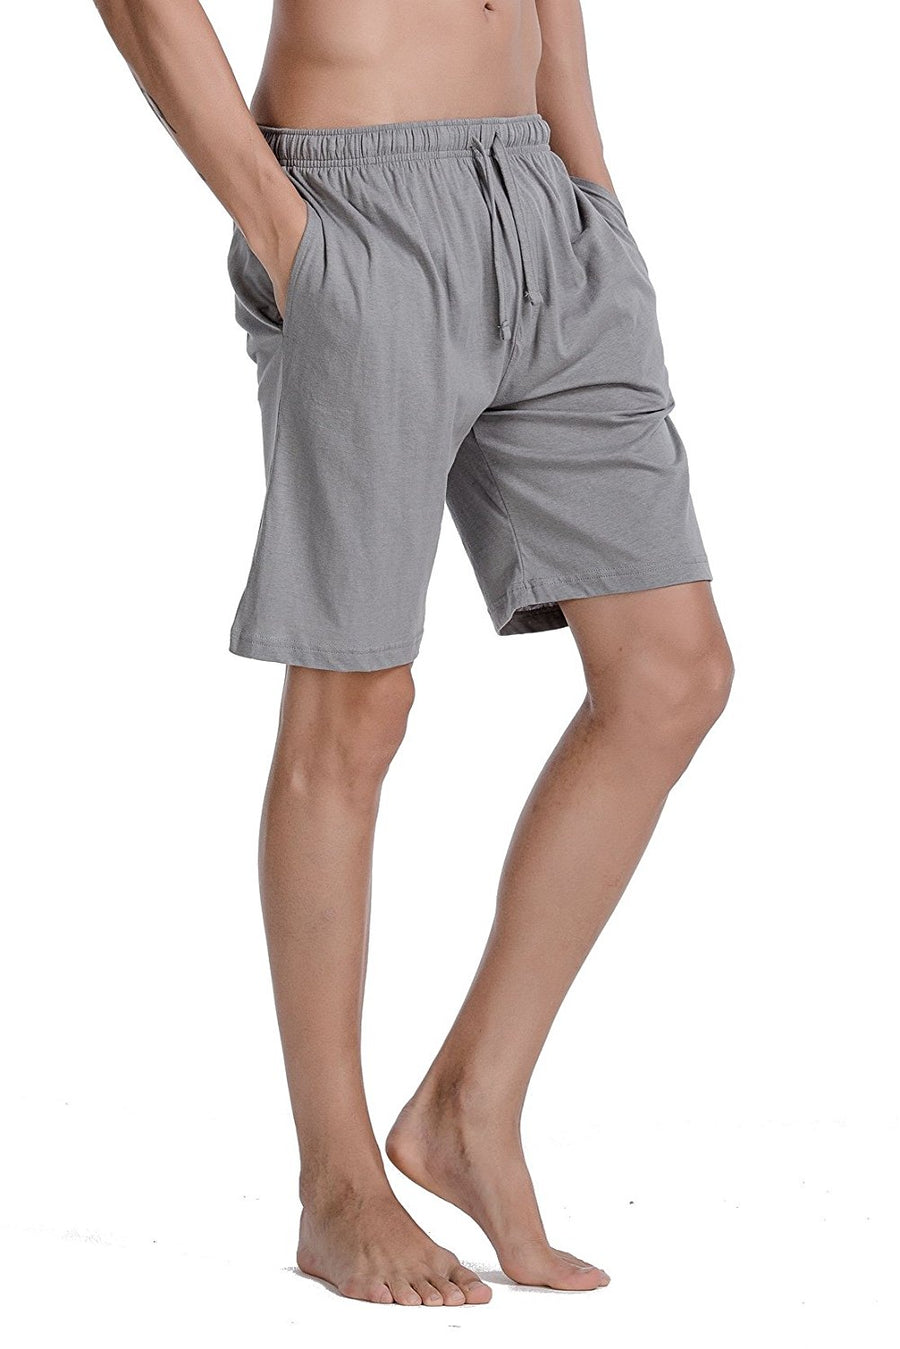 CYZ Men's Comfort Cotton Jersey Shorts With Pockets